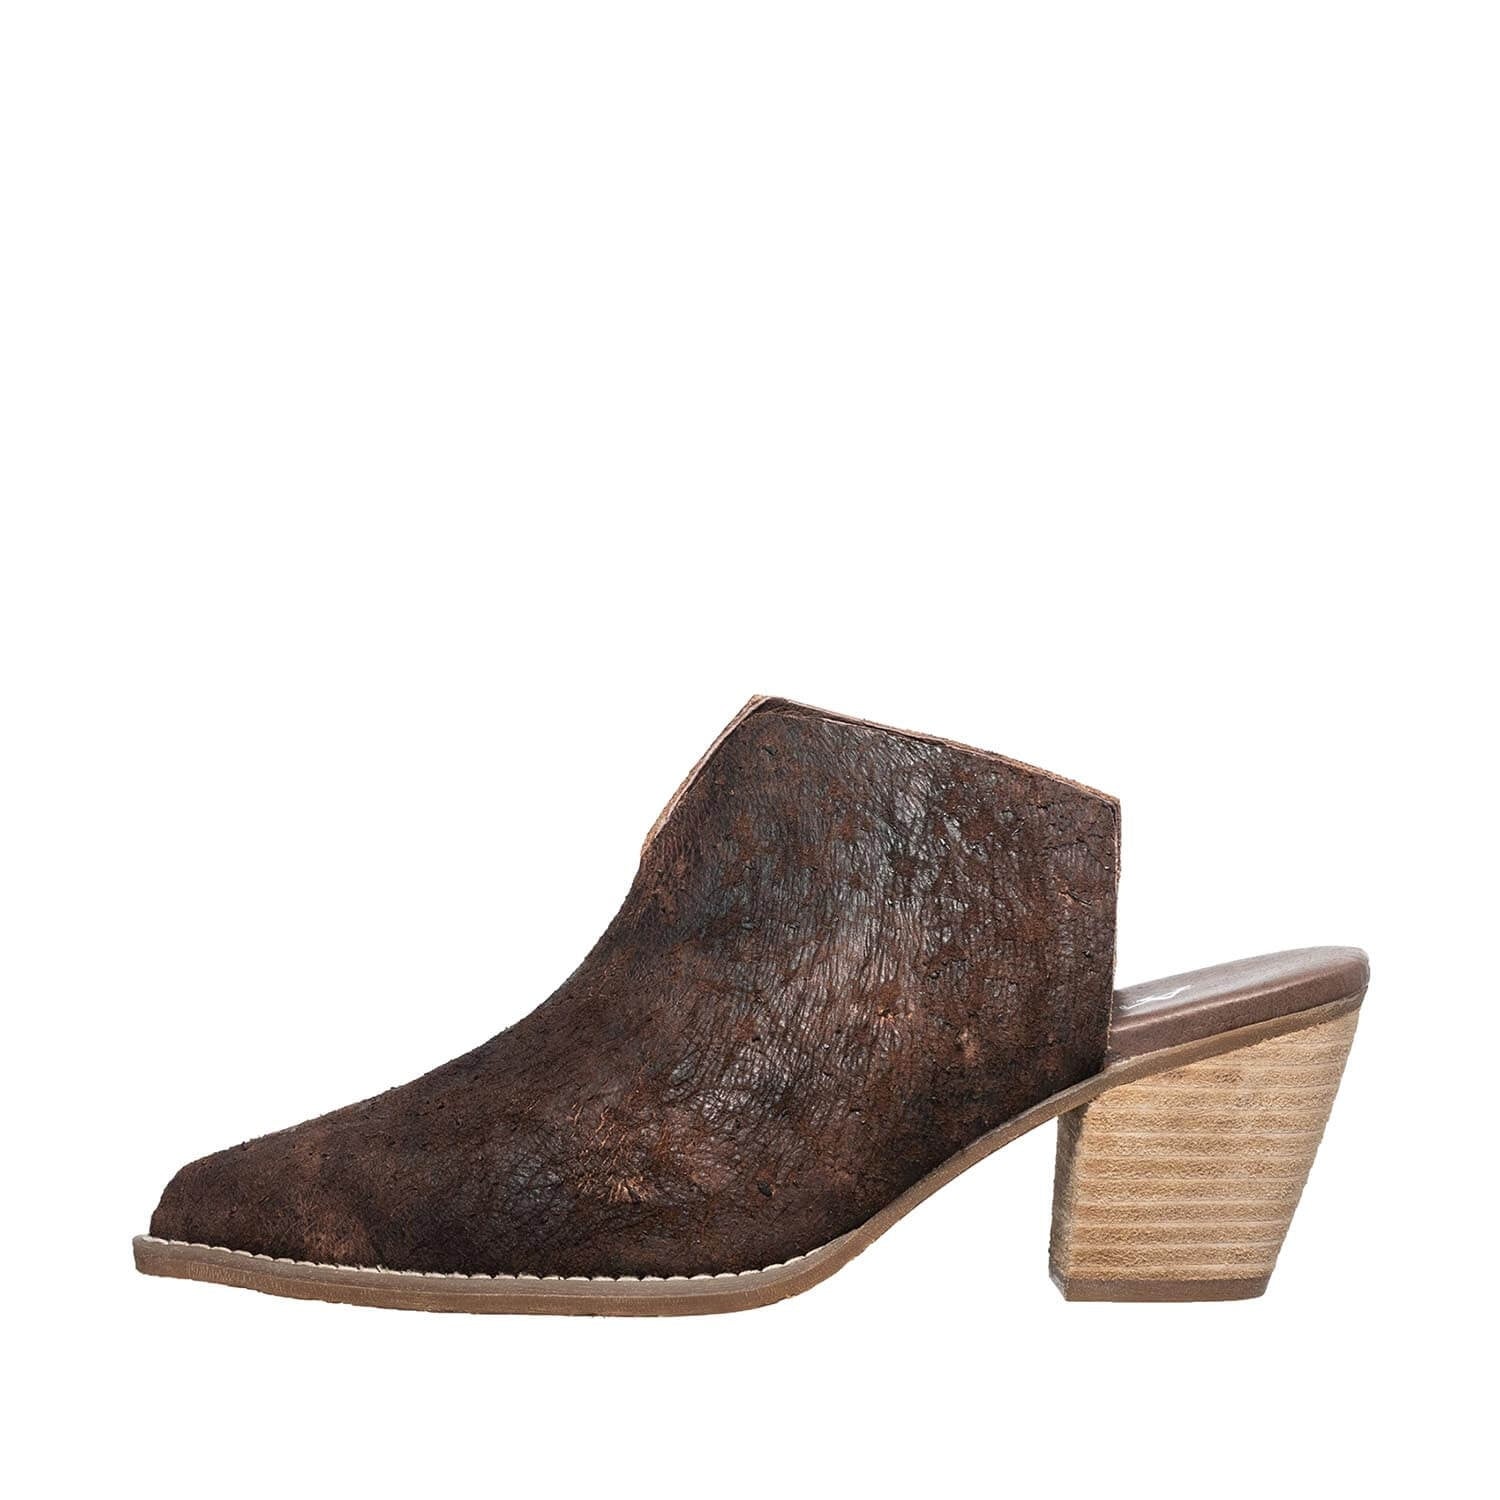 women's leather mules with heels